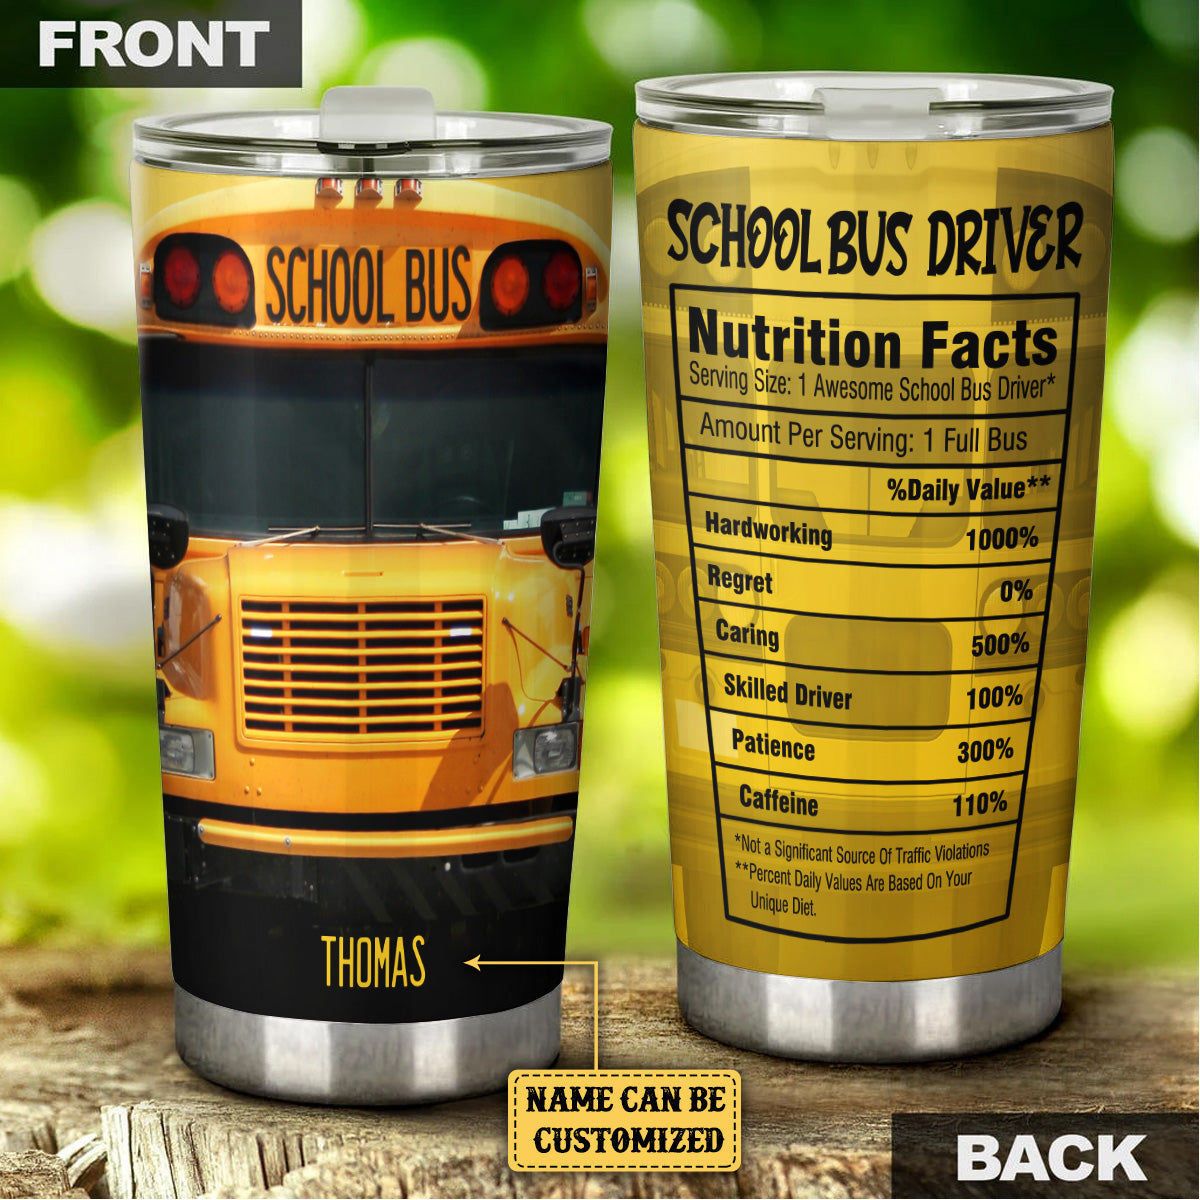 Personalized School Bus Driver Nutritional Facts Tumbler